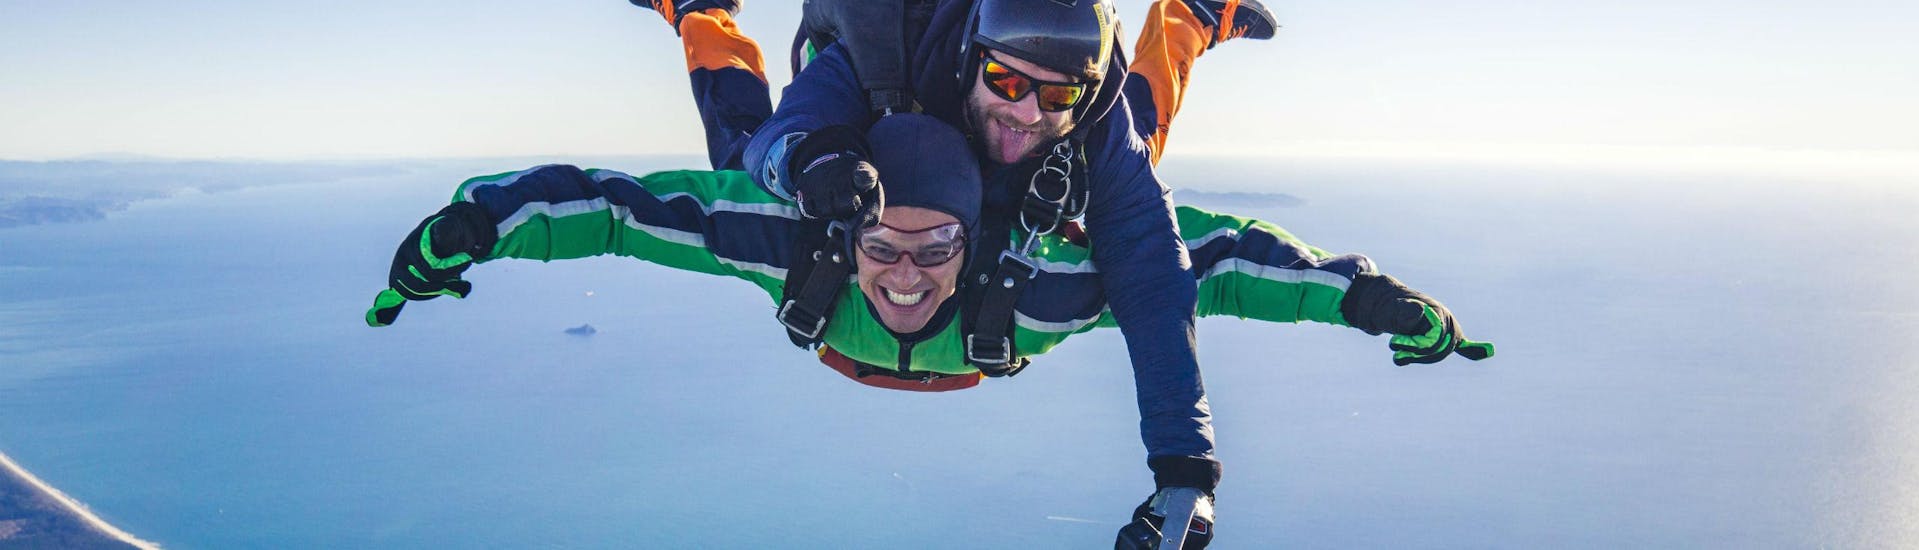 A tandem student is visibly enjoying himself while Tandem Skydiving in Tauranga with his tandem master from Skydive Tauranga.